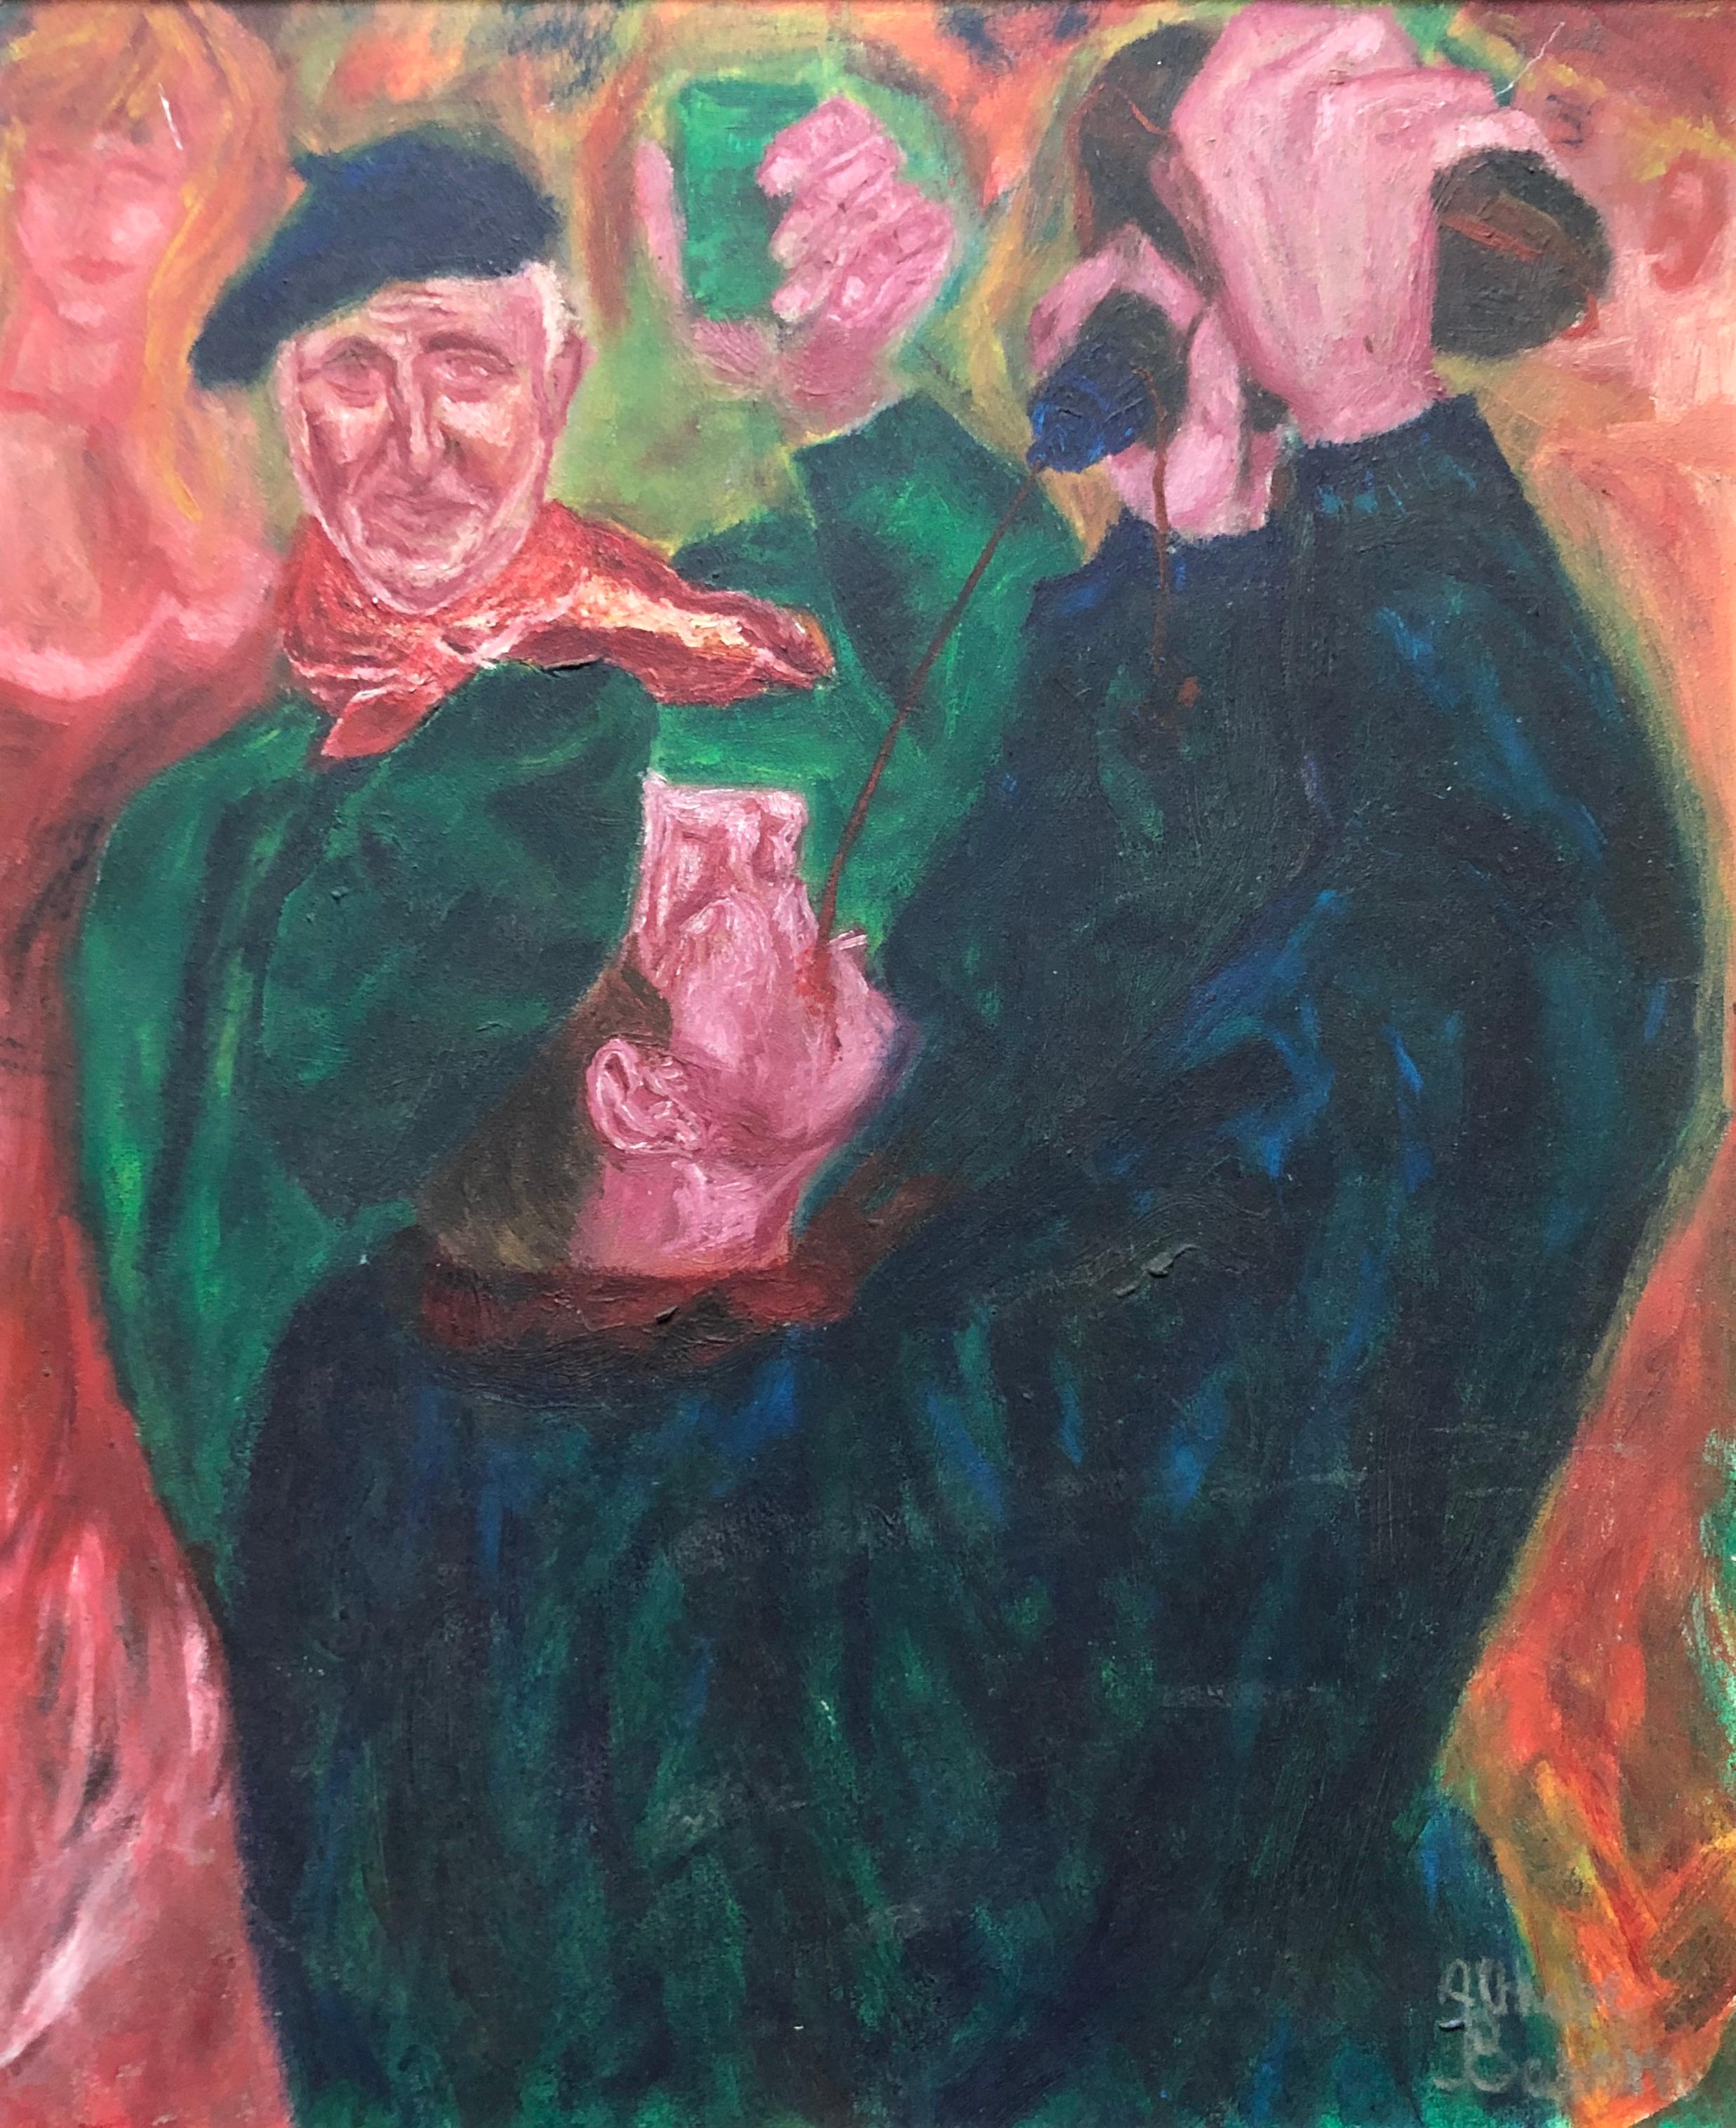 Unknown Portrait Painting - Basque Festival, Oil On Canvas, Signature To Be Identified